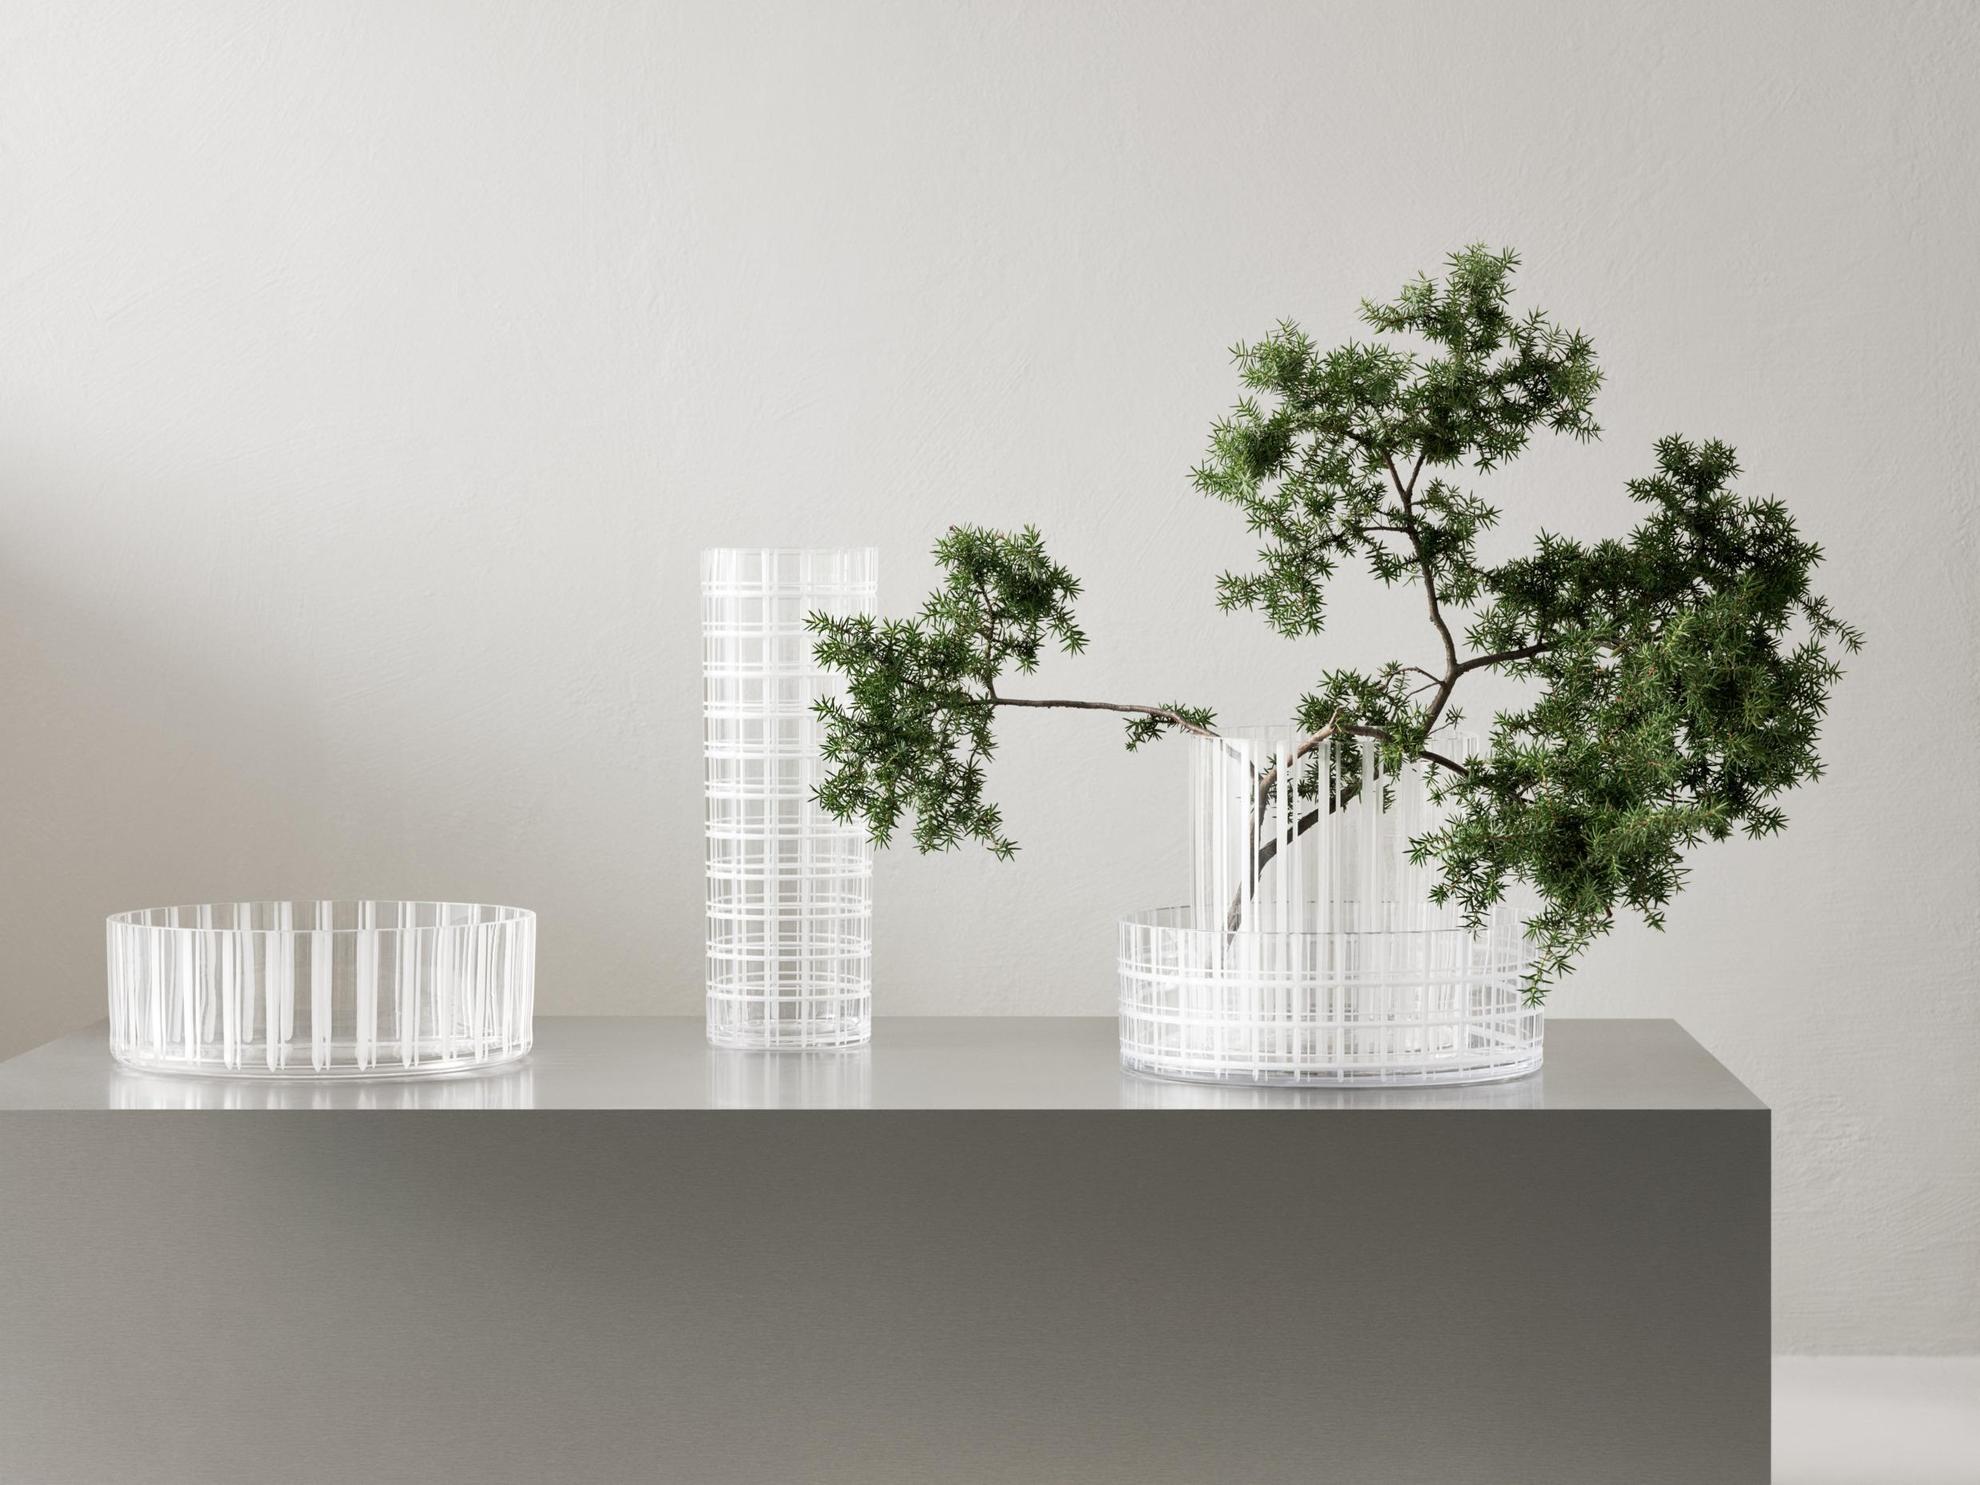 Four transparent vases with white stripes on a grey box. One vase has a small tree branch in it.